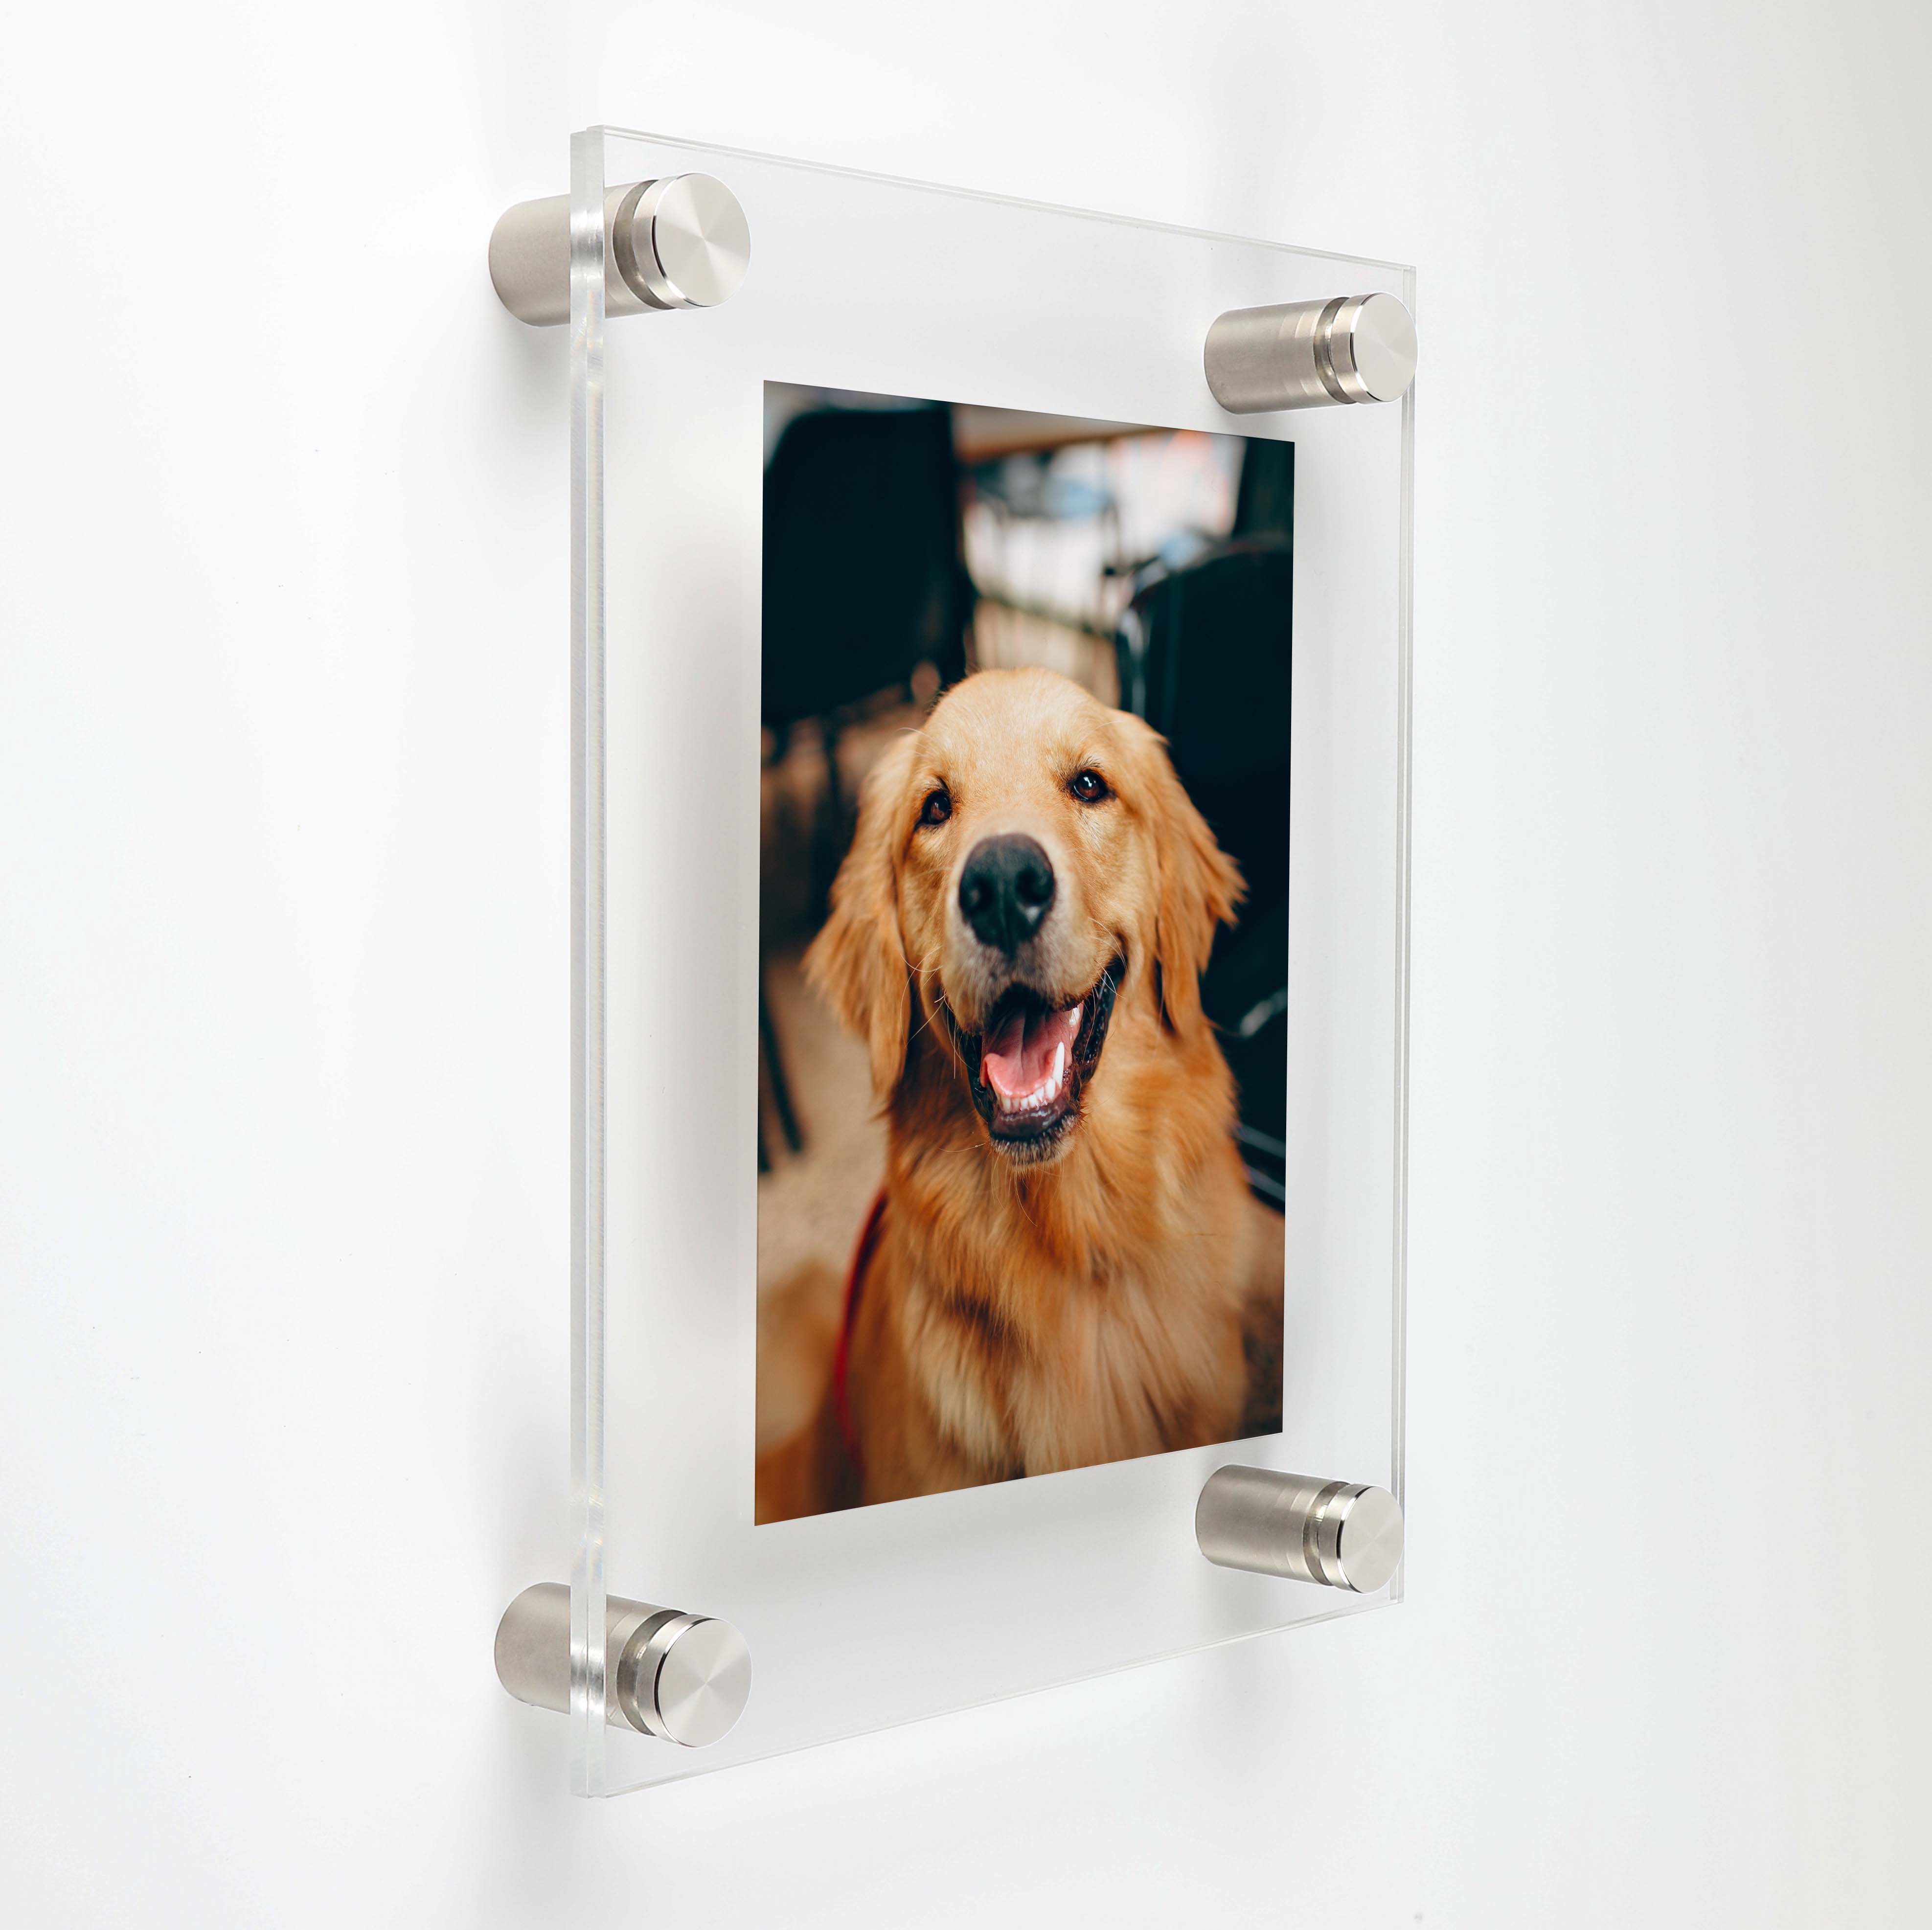 (2) 13-1/2'' x 16-1/2'' Clear Acrylics , Pre-Drilled With Polished Edges (Thick 1/8'' each), Wall Frame with (4) 5/8'' x 1/2'' Brushed Stainless Steel Standoffs includes Screws and Anchors